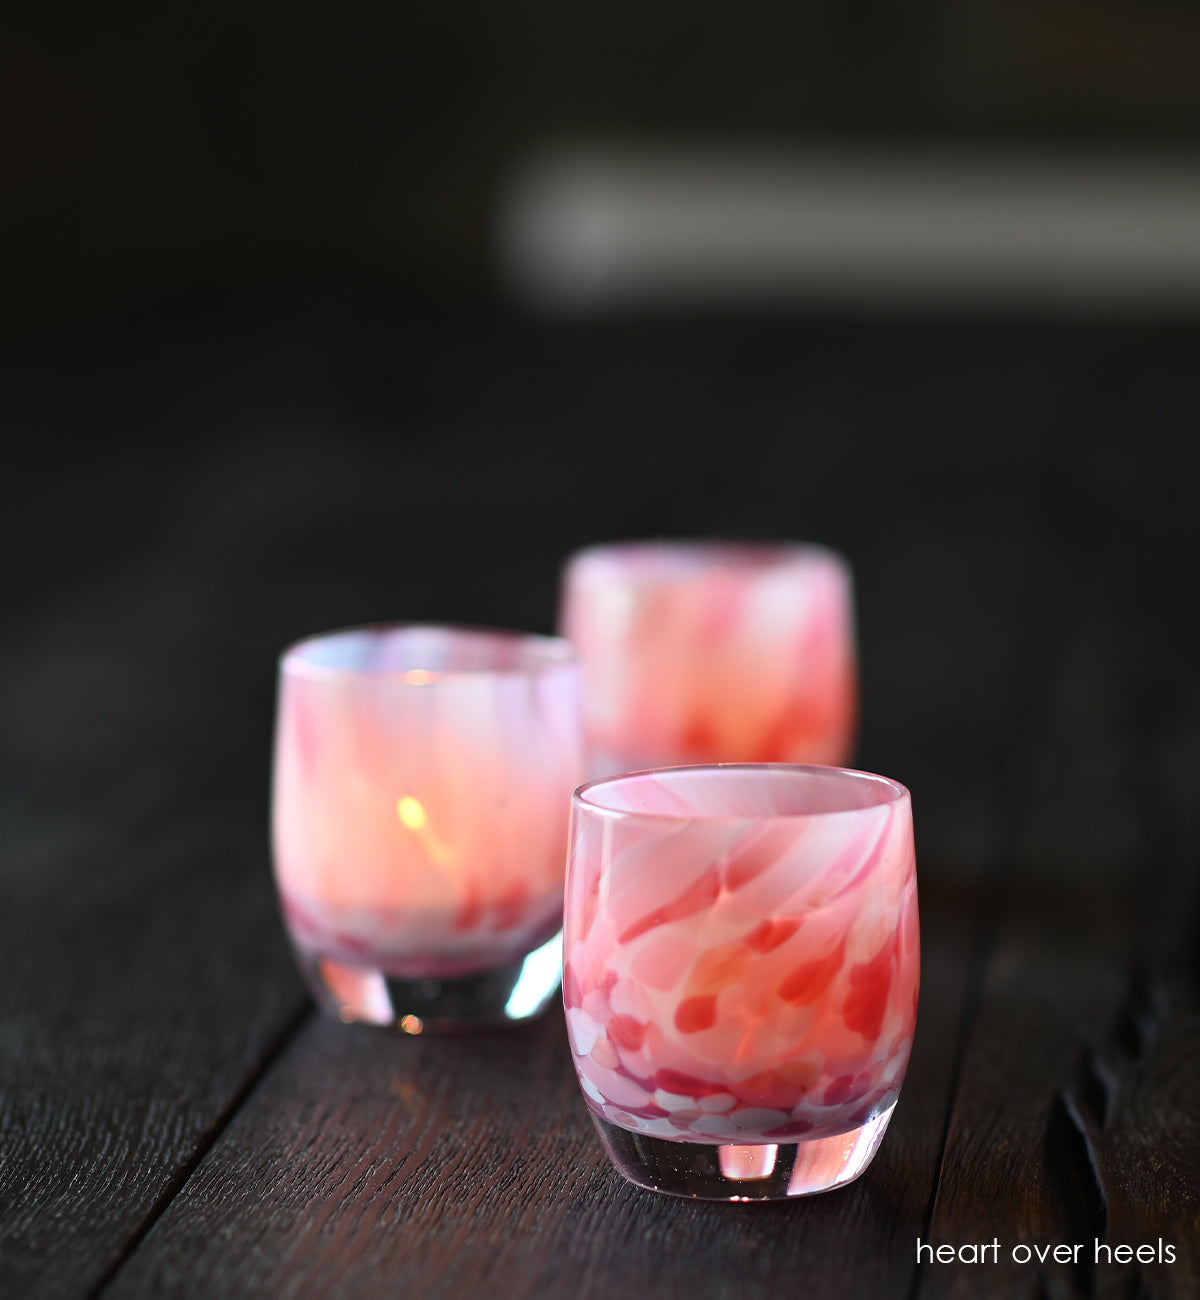 heart over heels white and pink speckled hand-blown glass votive candle holder.